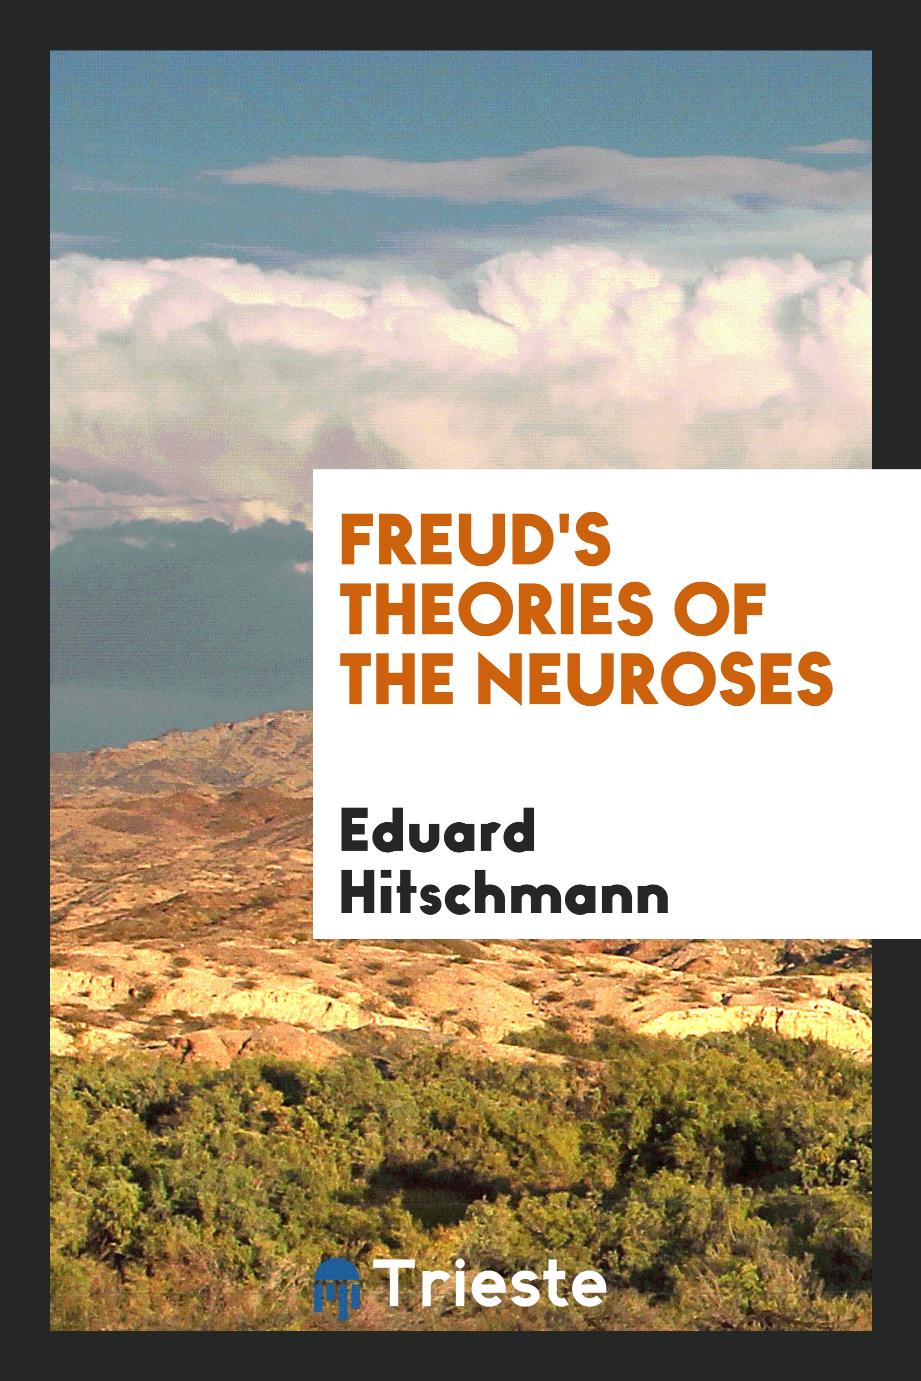 Freud's theories of the neuroses